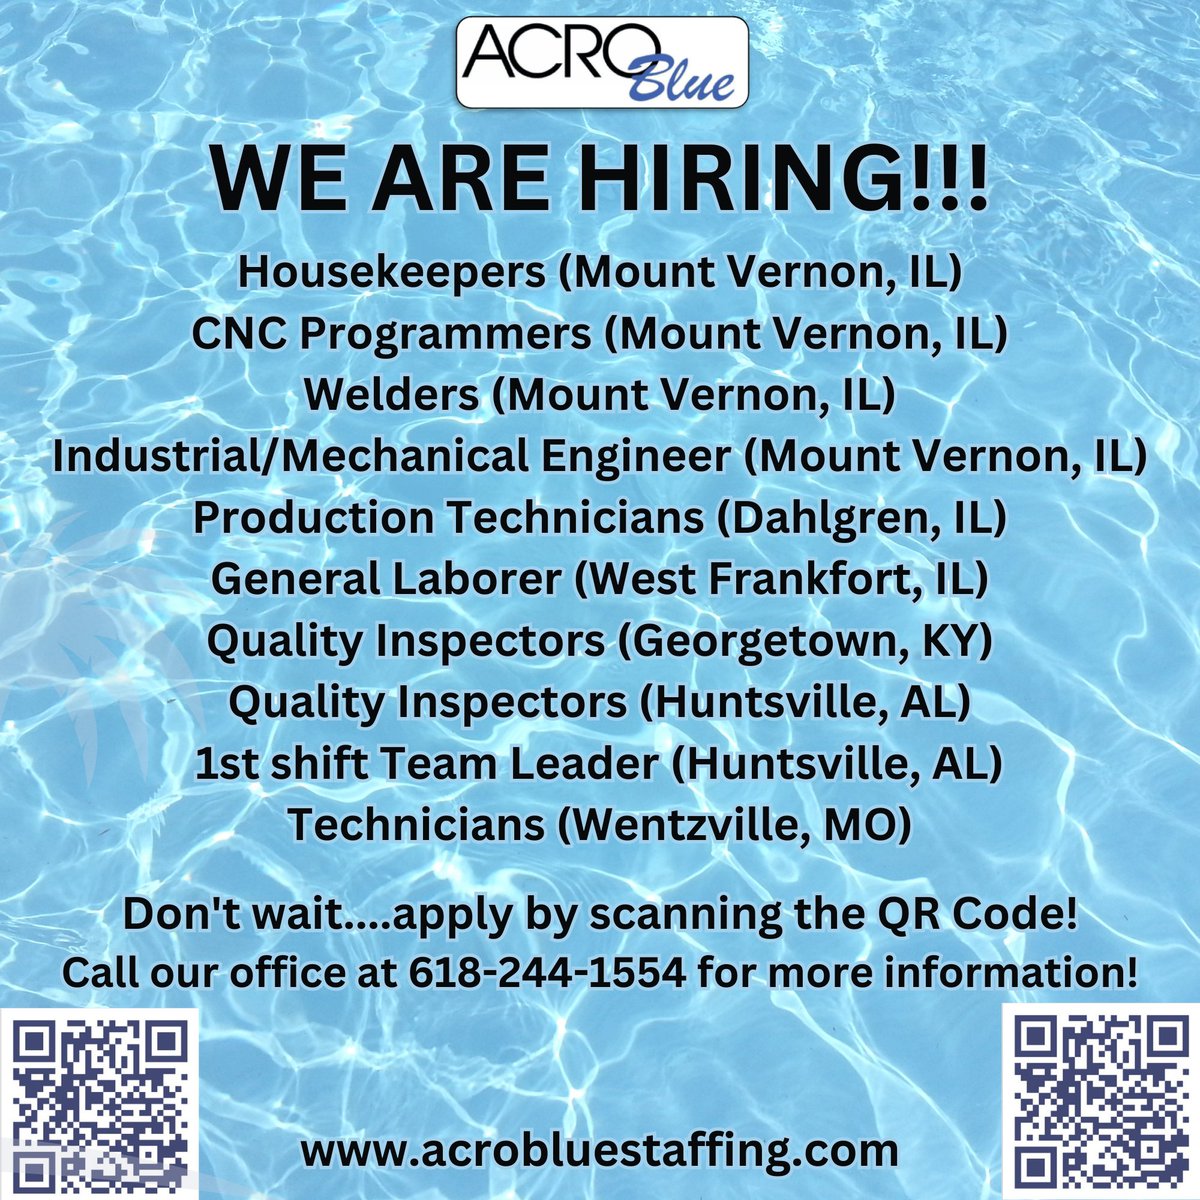 Acro Blue is hiring! Check out our current openings! #acrobluecareers #careers #opportunities #August2023 #manufacturing #technicians #welders #housekeeper #engineers #production #mountvernonil #huntsvilleal #georgetownky #wentzvillemo #missouri #illinois #kentucky #Alabama